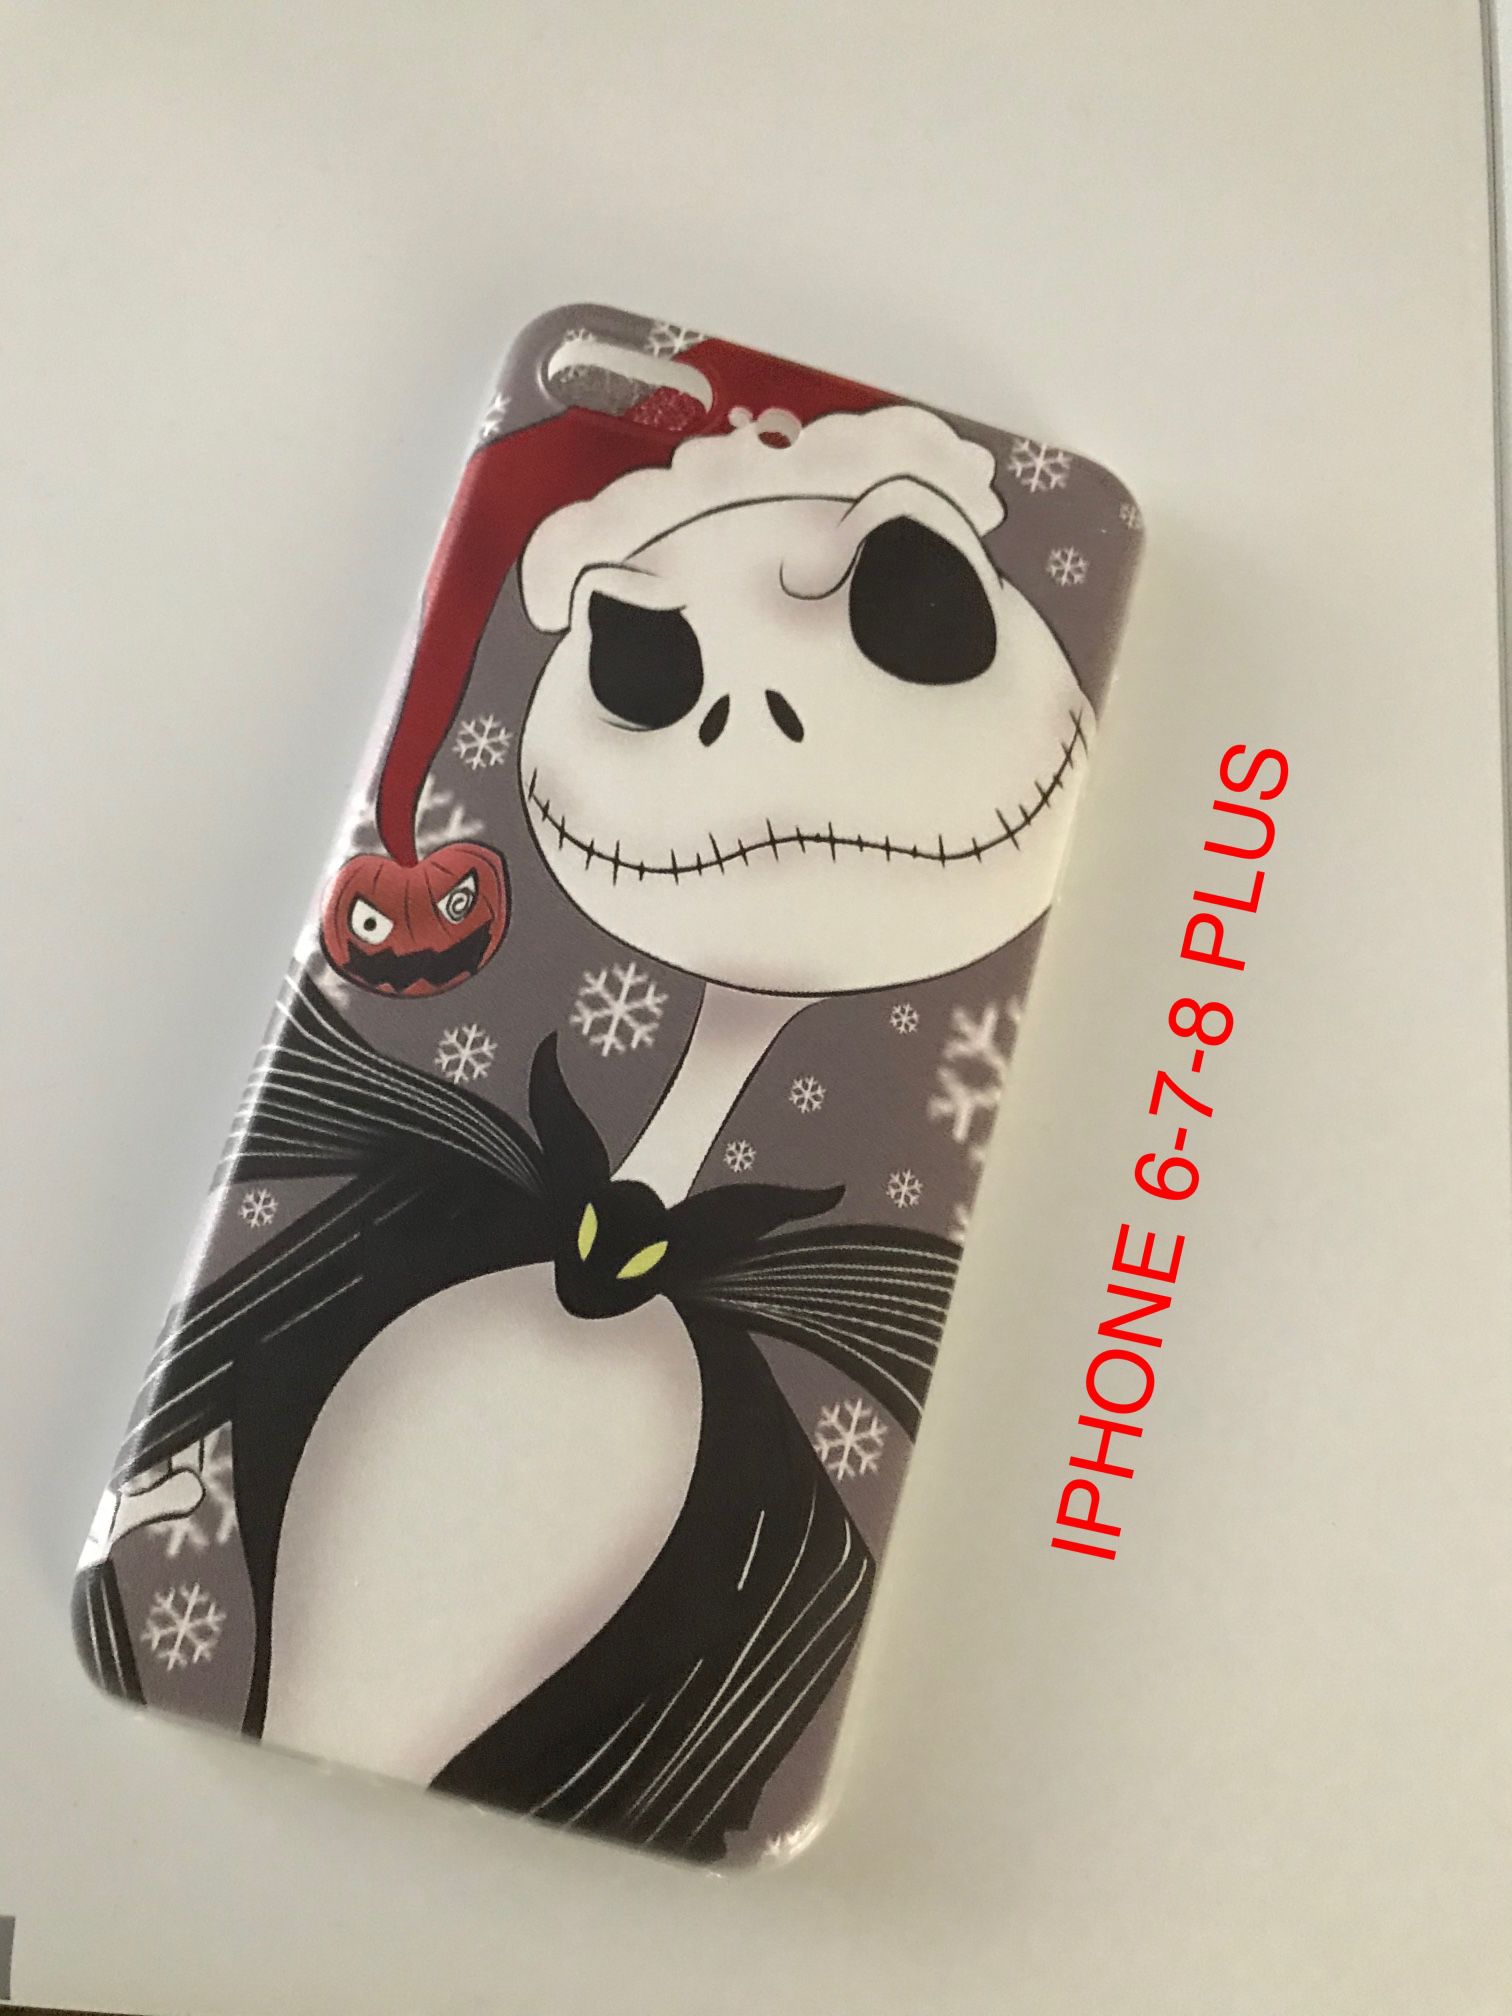 The Nightmare Before Christmas Jack Skellington.  iPhone case for 6-7-8 PLUS. (Nuevo).    FIRM.                 NO TRADES.       NO SHIPPING  (EAST PA